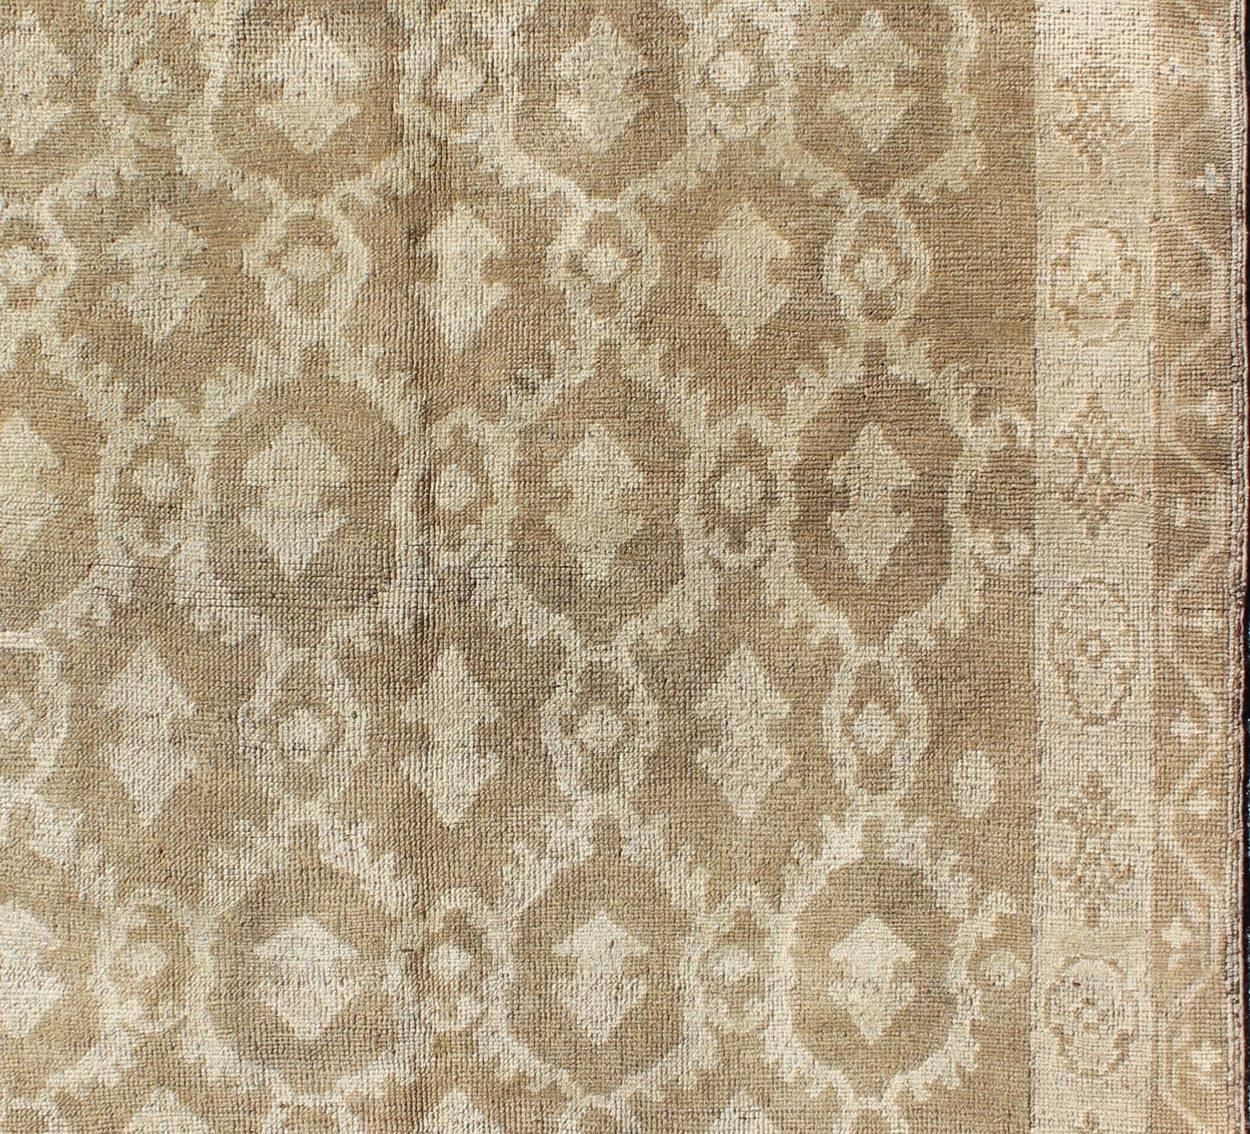 Square Shape Cross-Latch Squarish Turkish Vintage Oushak Rug in Taupe and Cream In Good Condition For Sale In Atlanta, GA